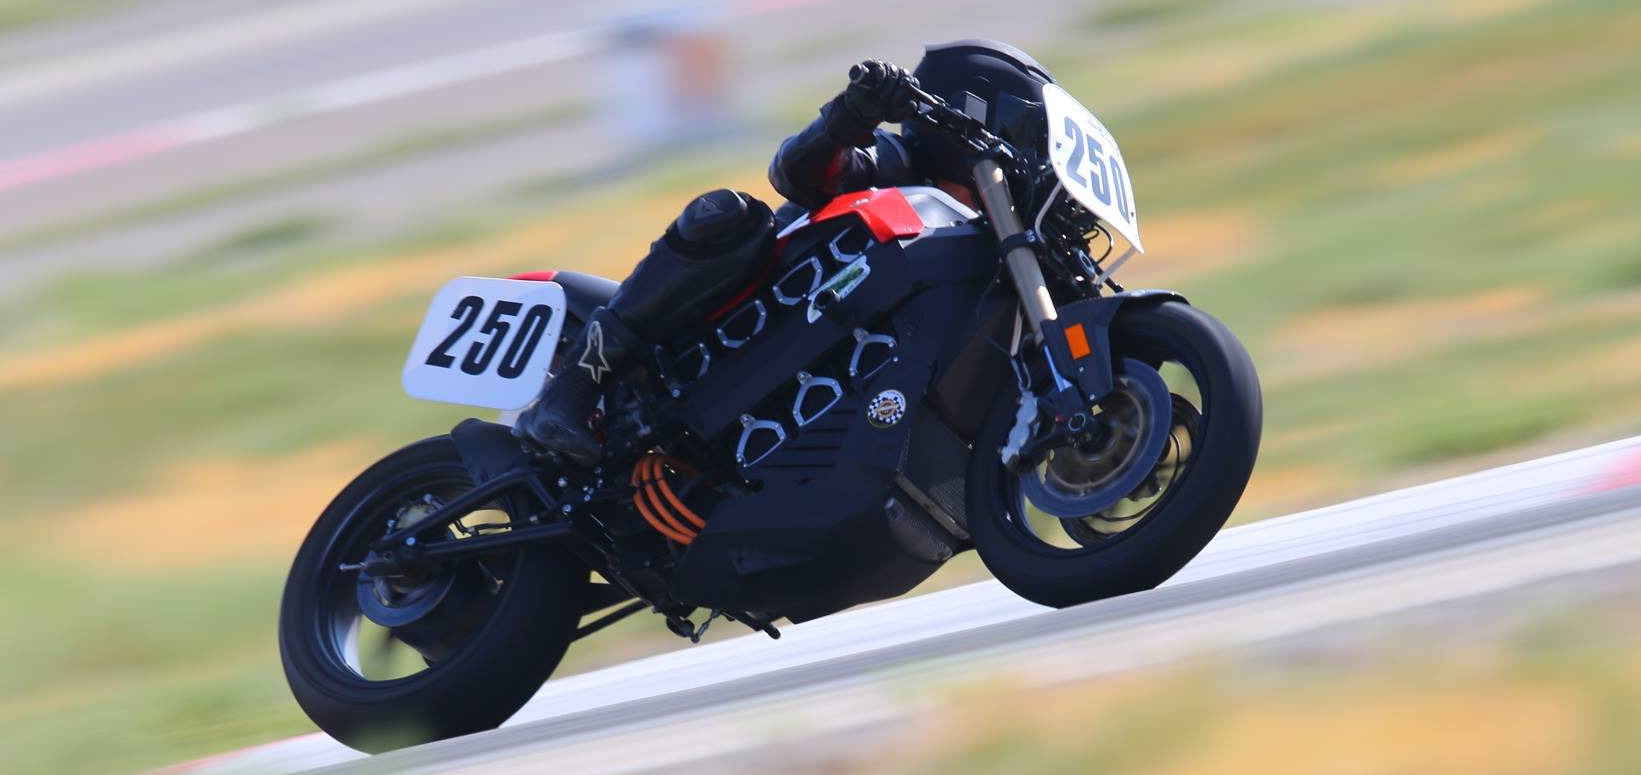 Hanni Burger (250) on an electric motorcycle at an AHRMA race. Photo by etechphoto.com, courtesy AHRMA.